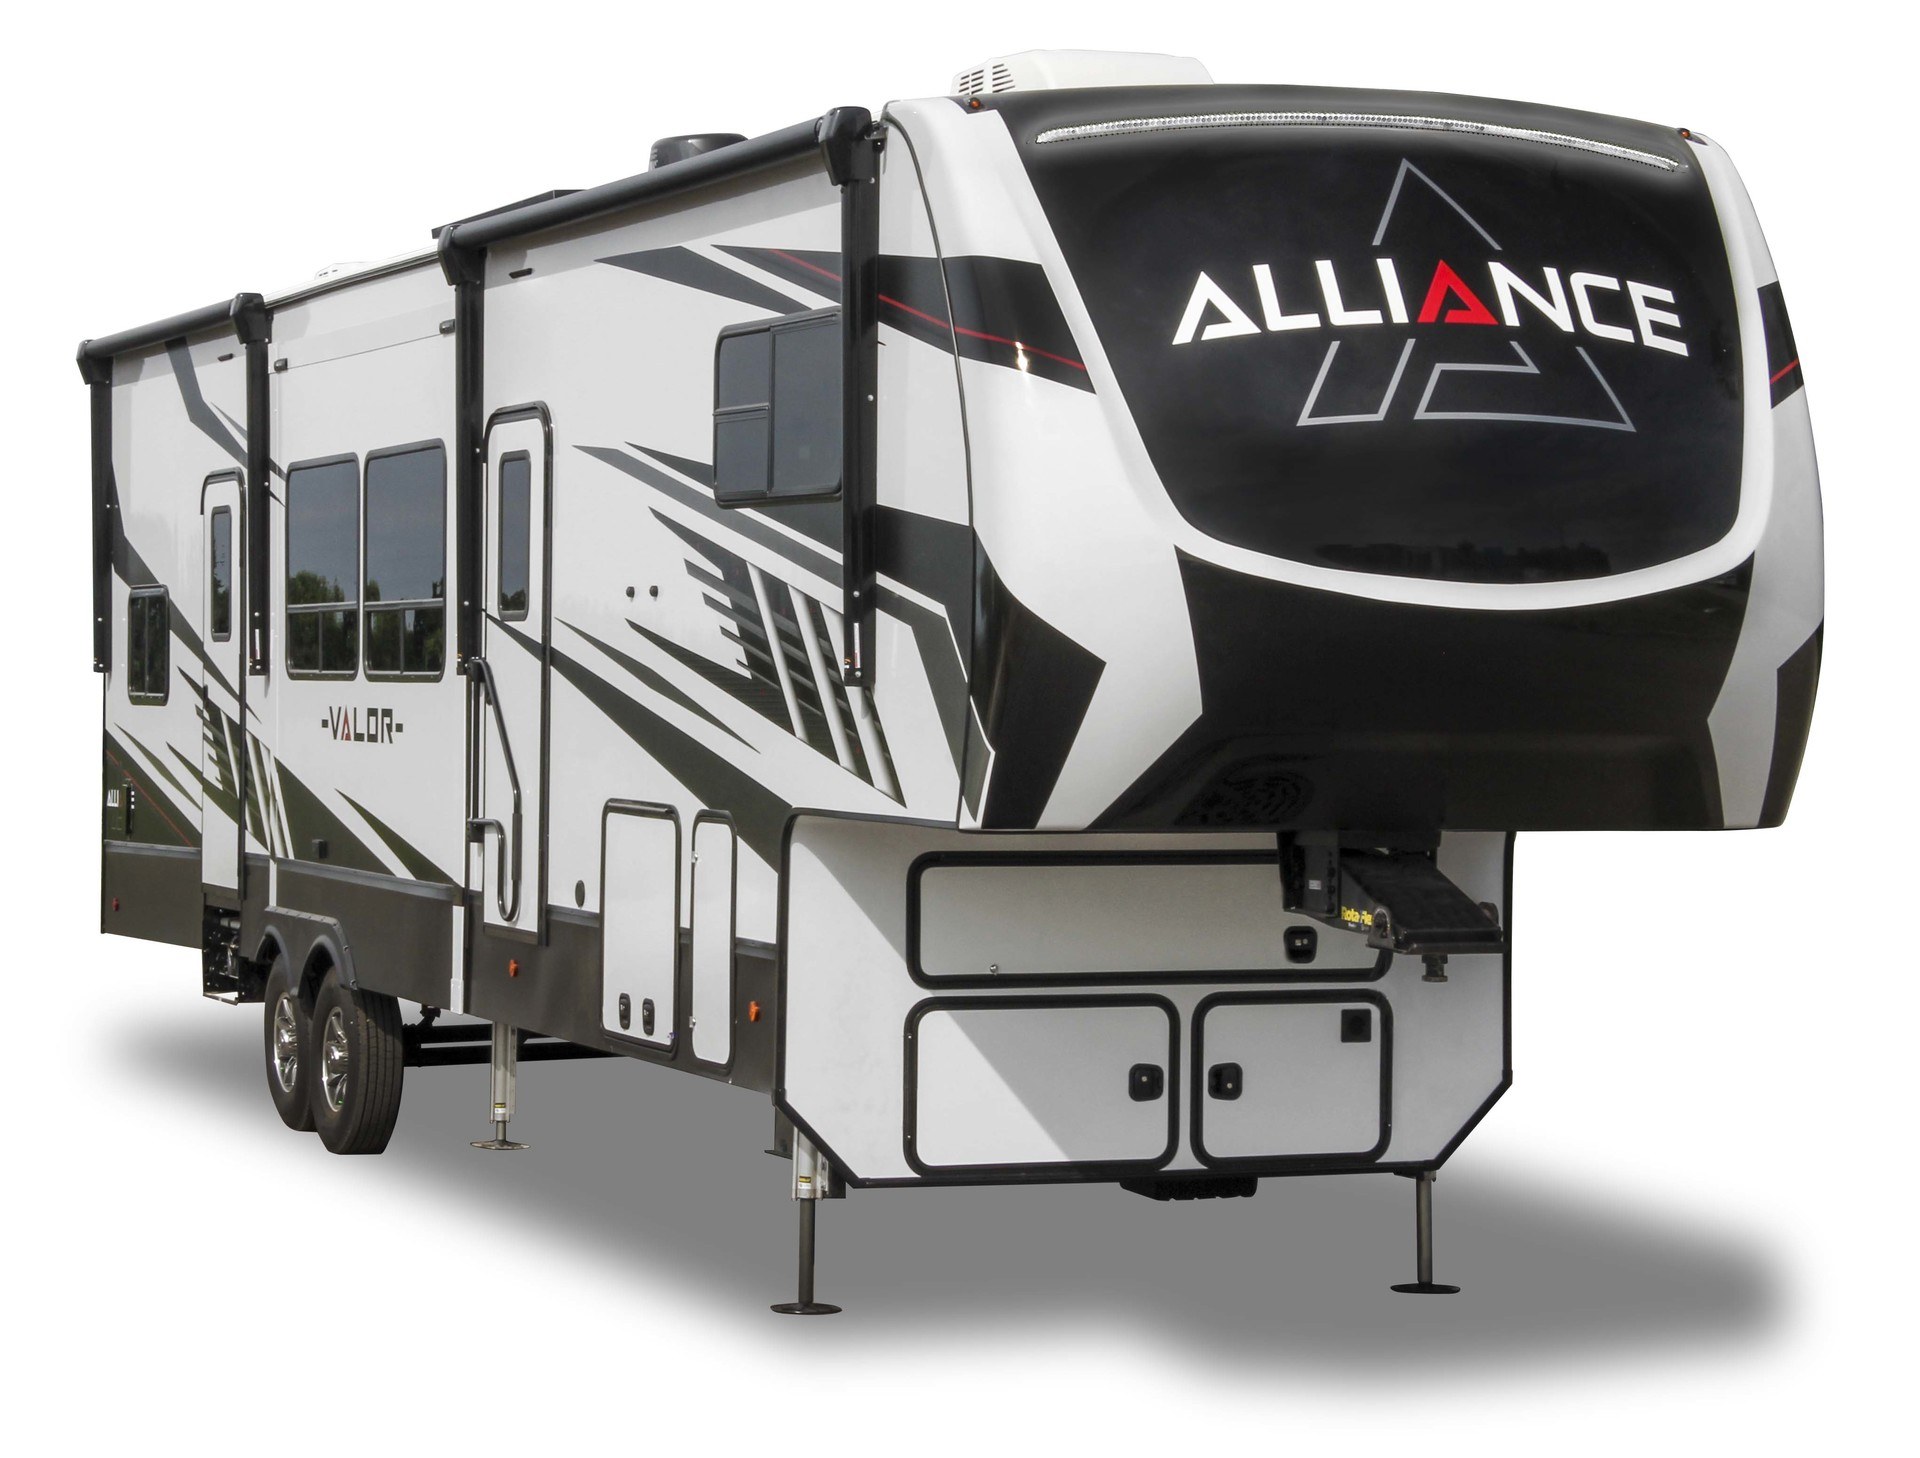 Alliance Rv Introduces New Toy Hauler